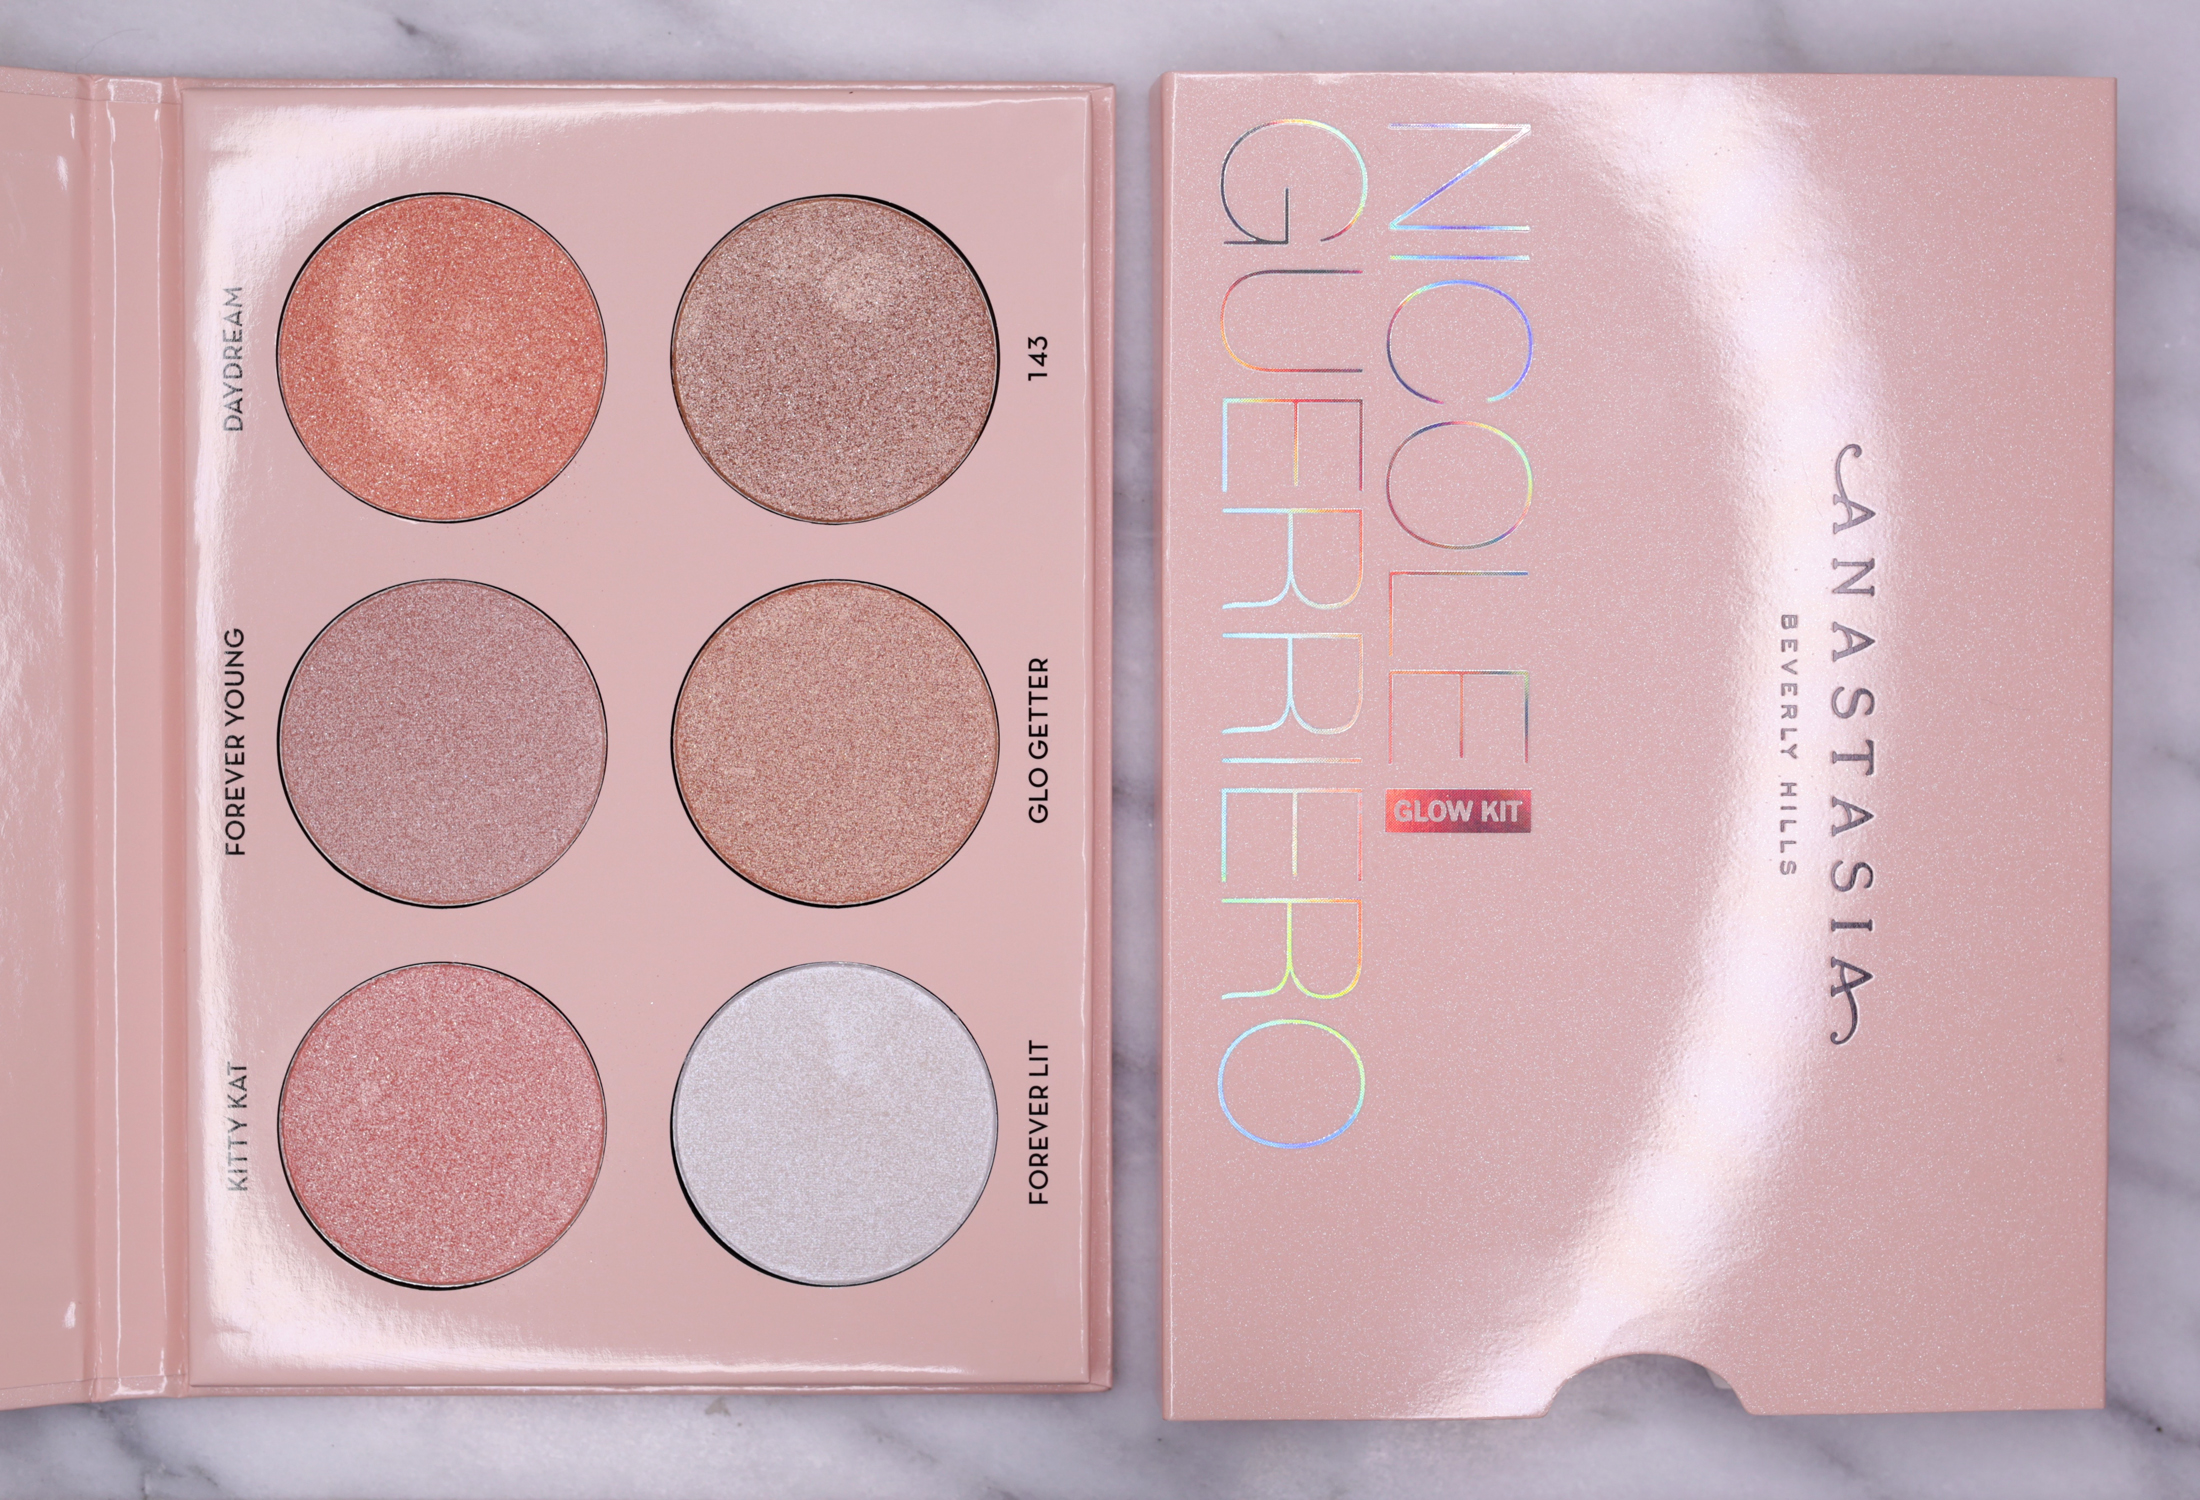 Nicole Guerriero x Anastasia Beverly Hills Glow Kit highlight palette review and swatches_1872.jpg